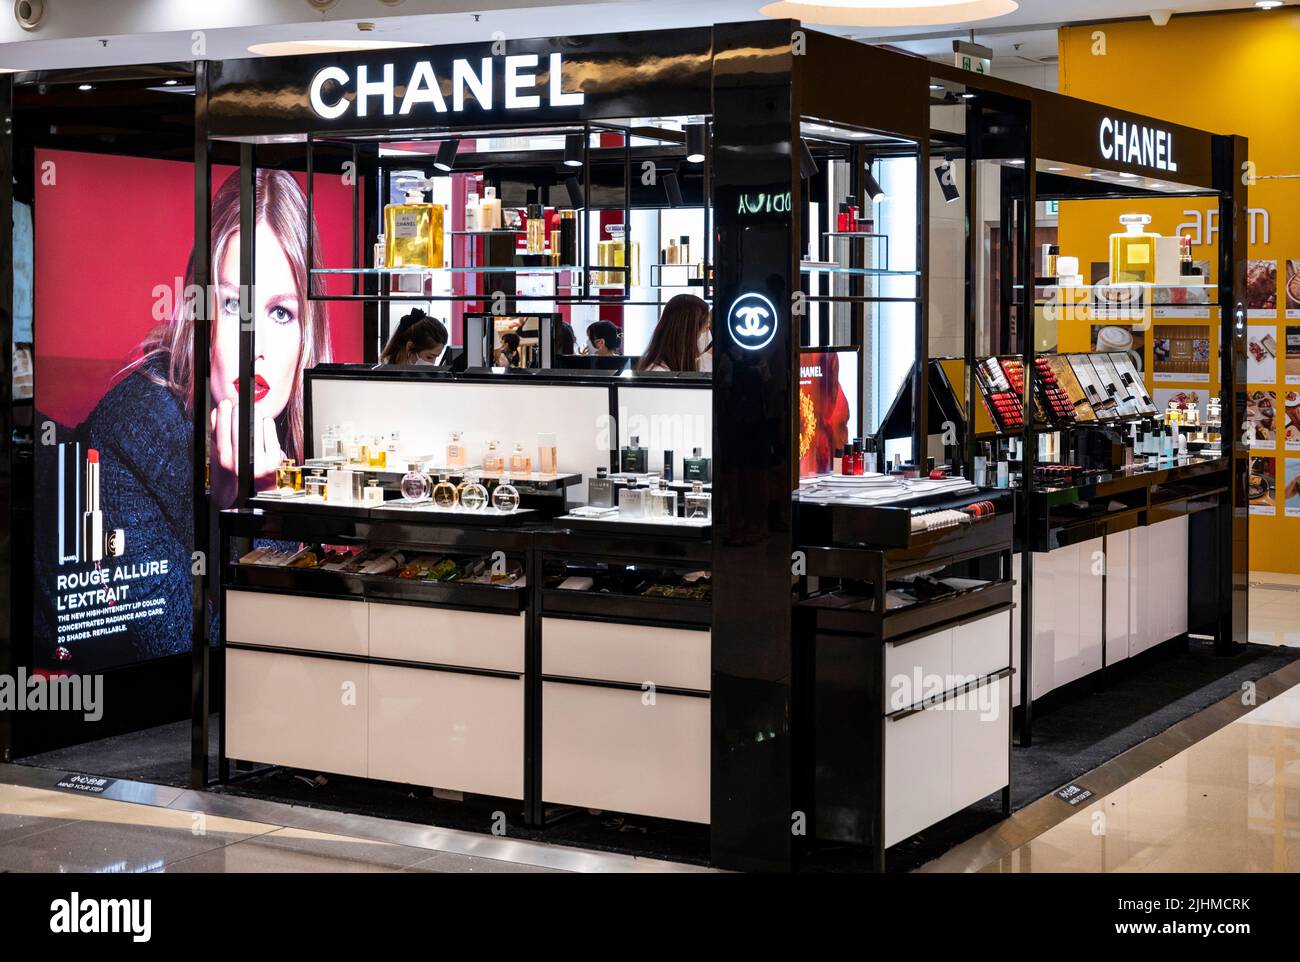 Chanel Beauty Launches The All New N°1 De Chanel Collection